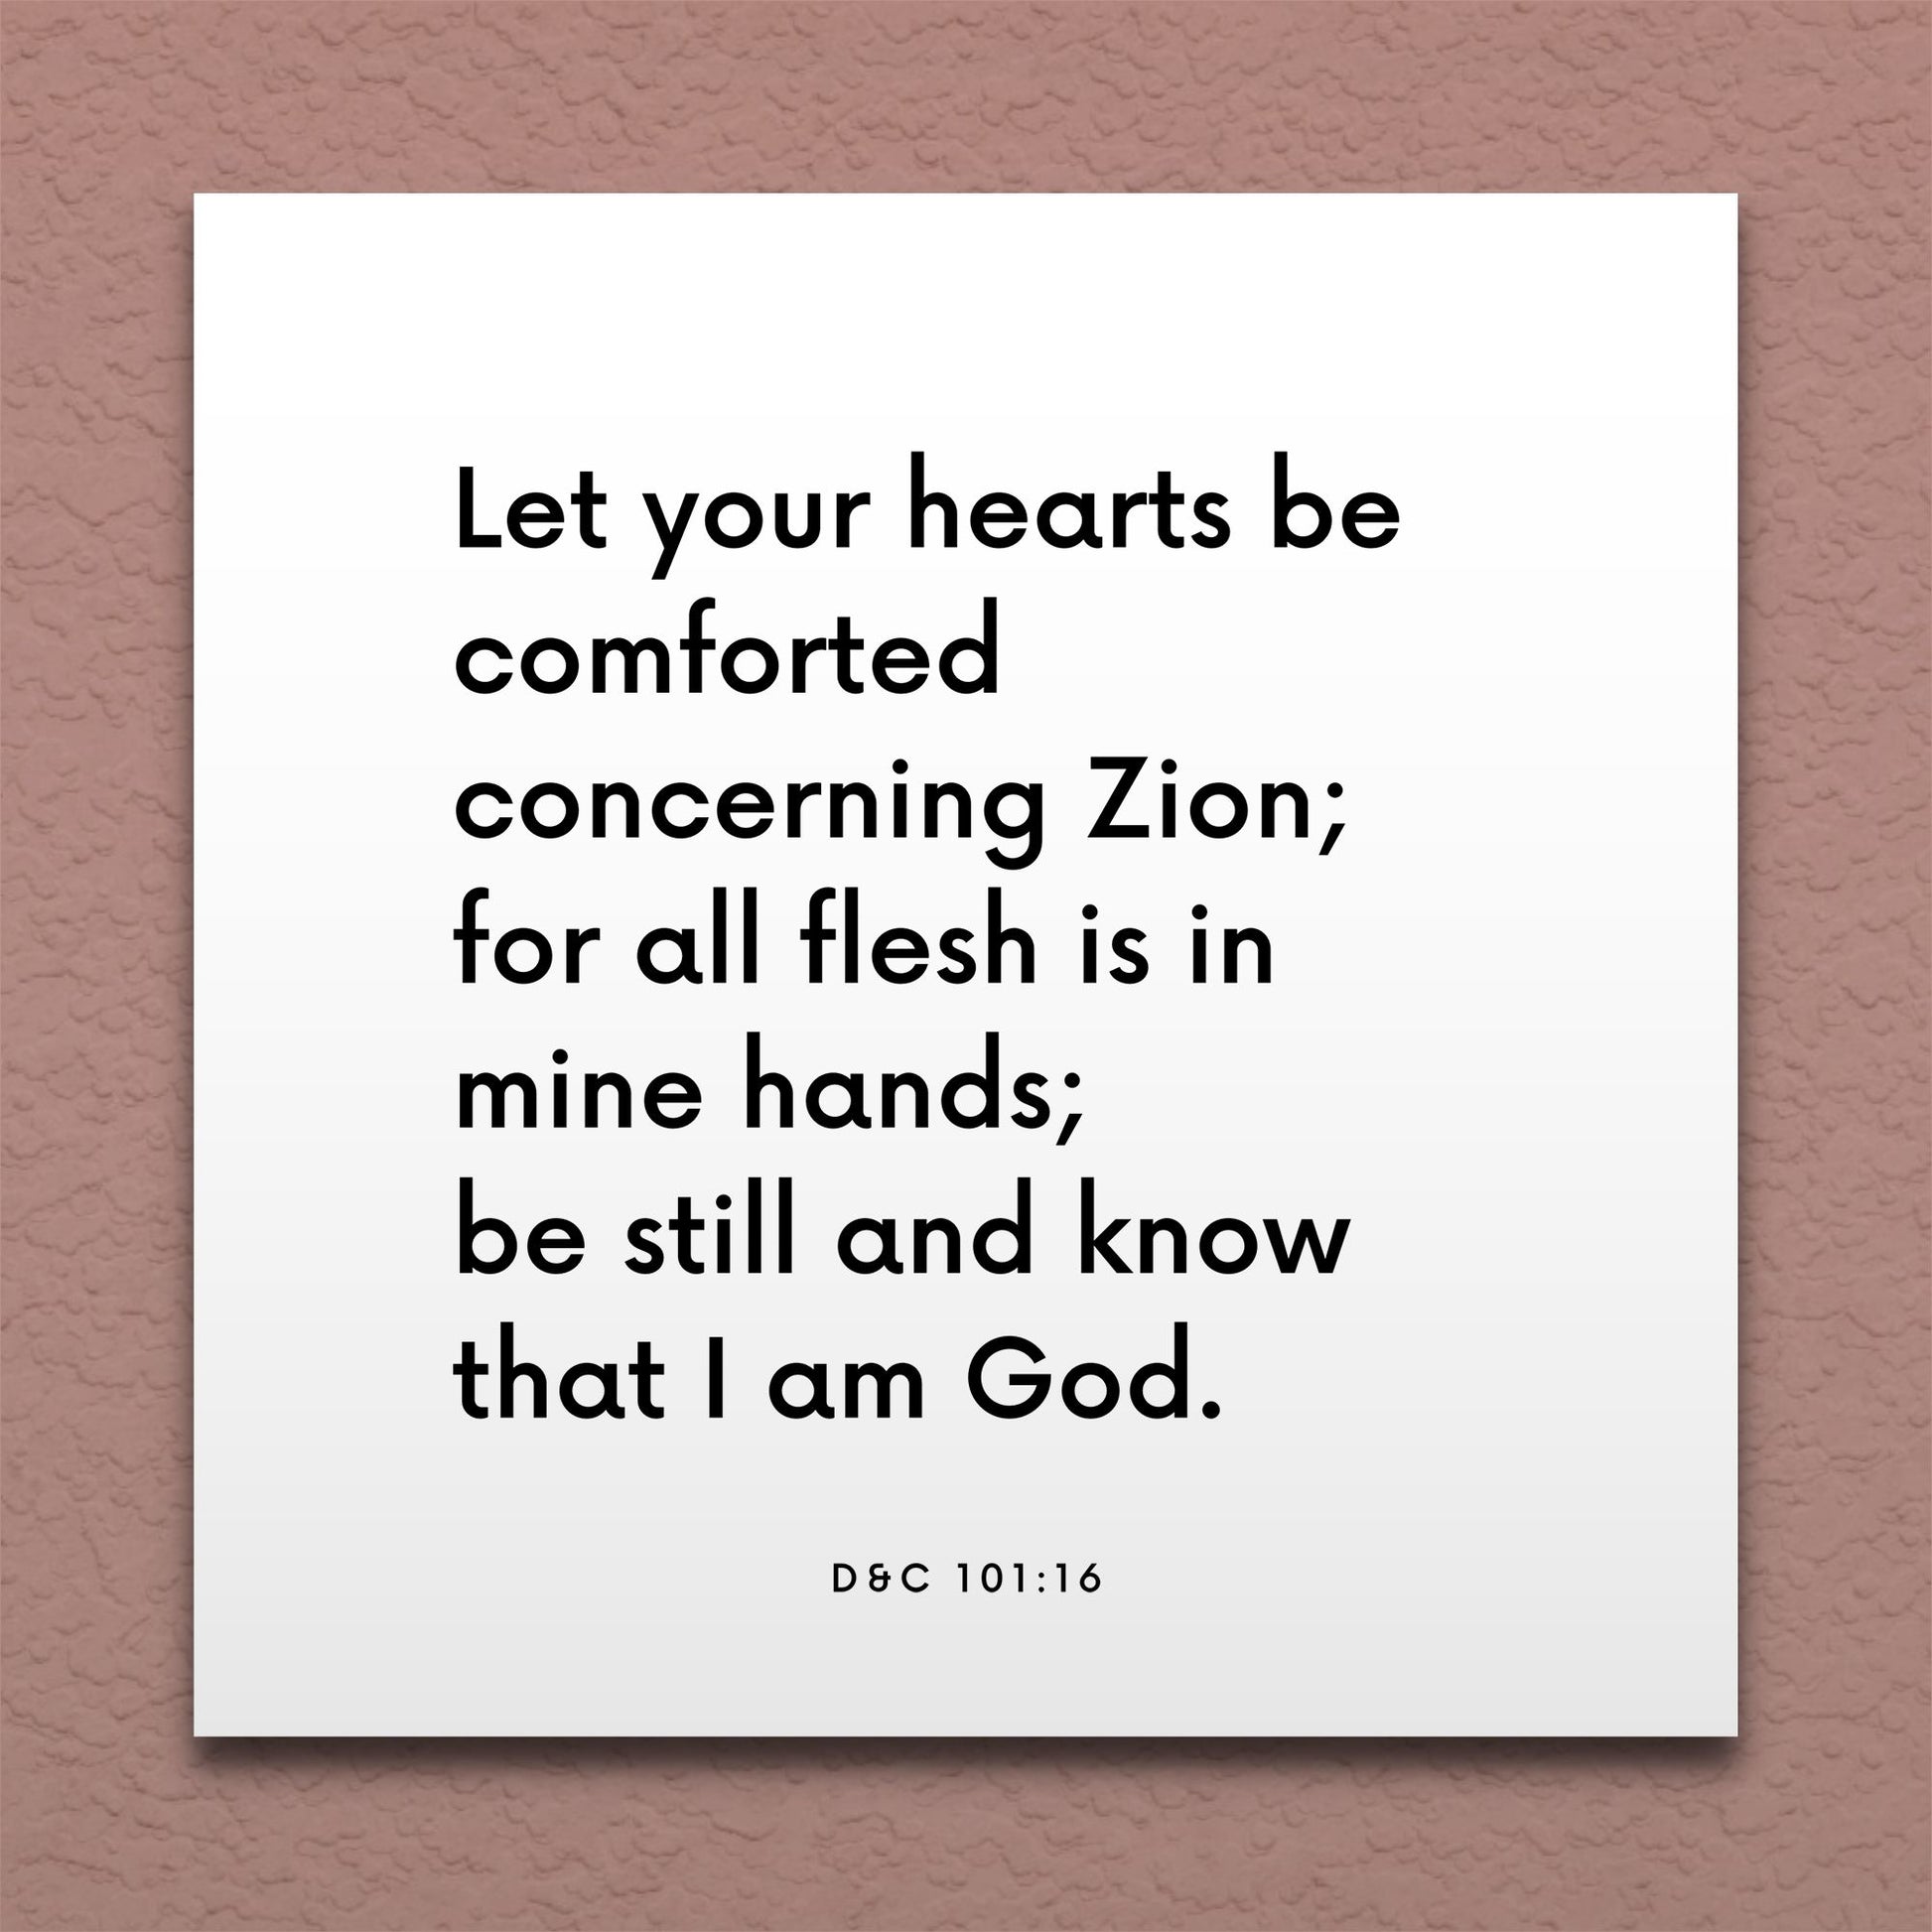 Wall-mounted scripture tile for D&C 101:16 - "Let your hearts be comforted concerning Zion"